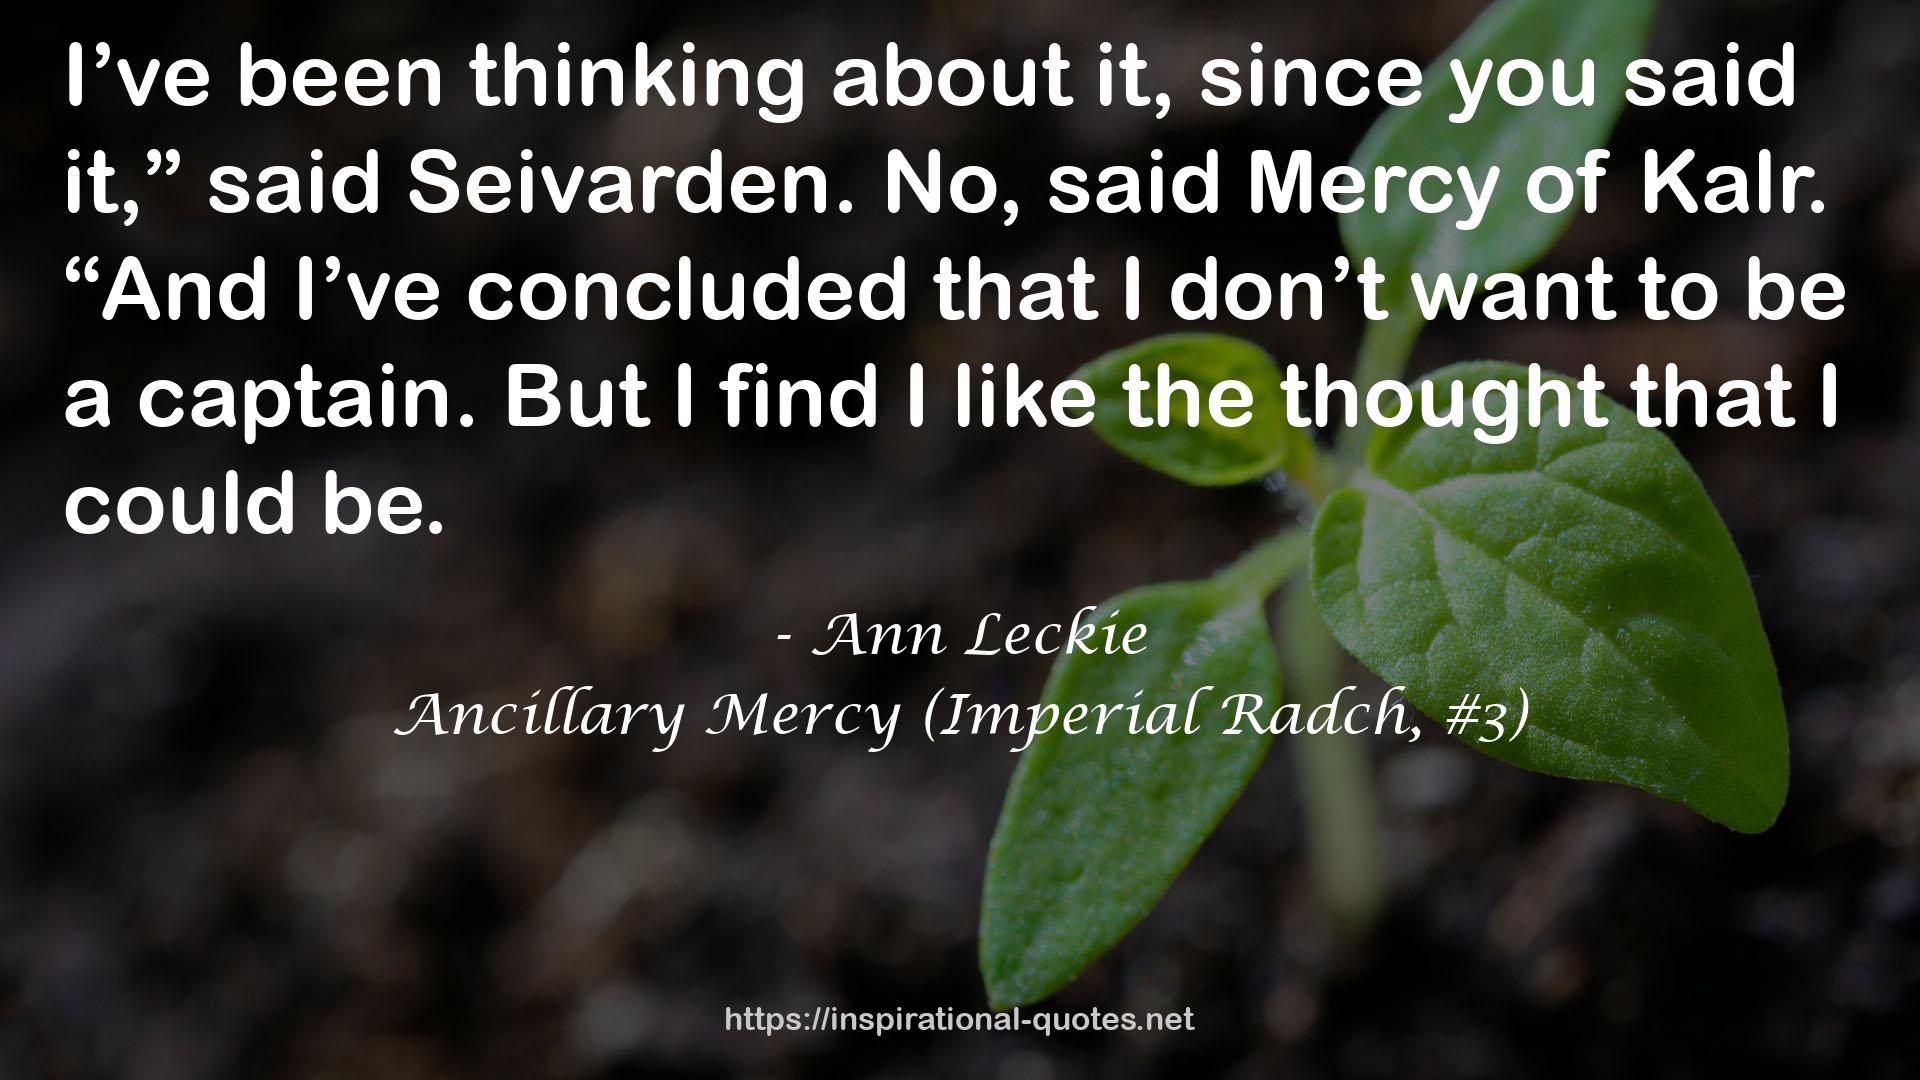 Ancillary Mercy (Imperial Radch, #3) QUOTES